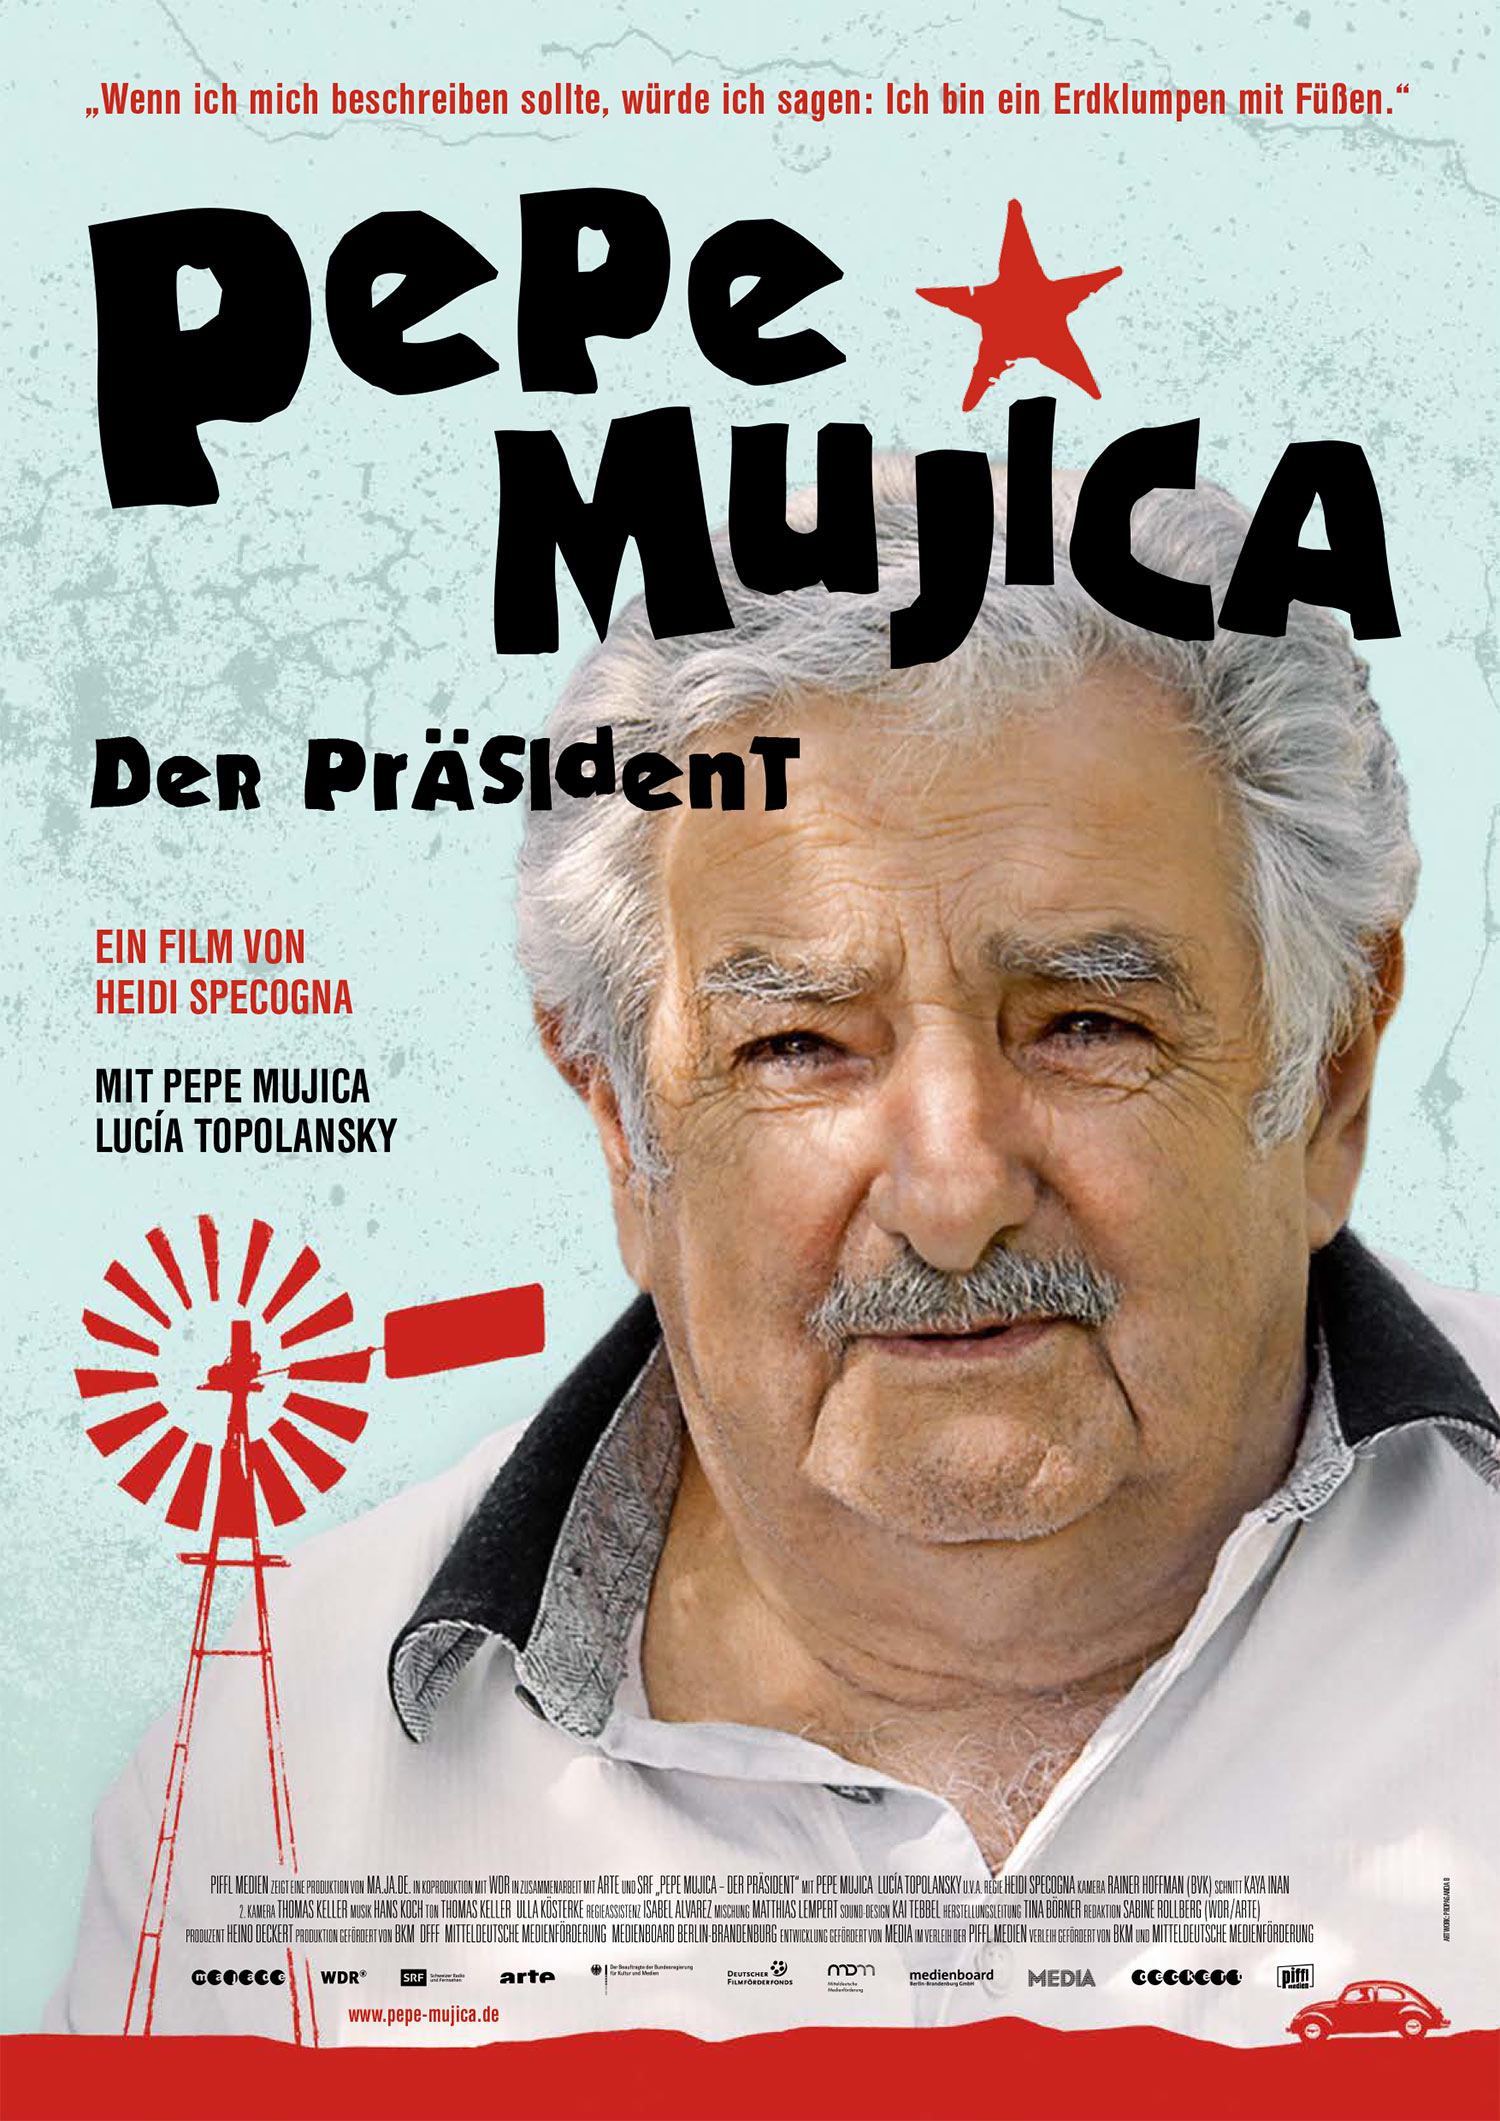 Piffl Medien<a href="/pepe-mujica">→</a><strong>Kreation</strong>